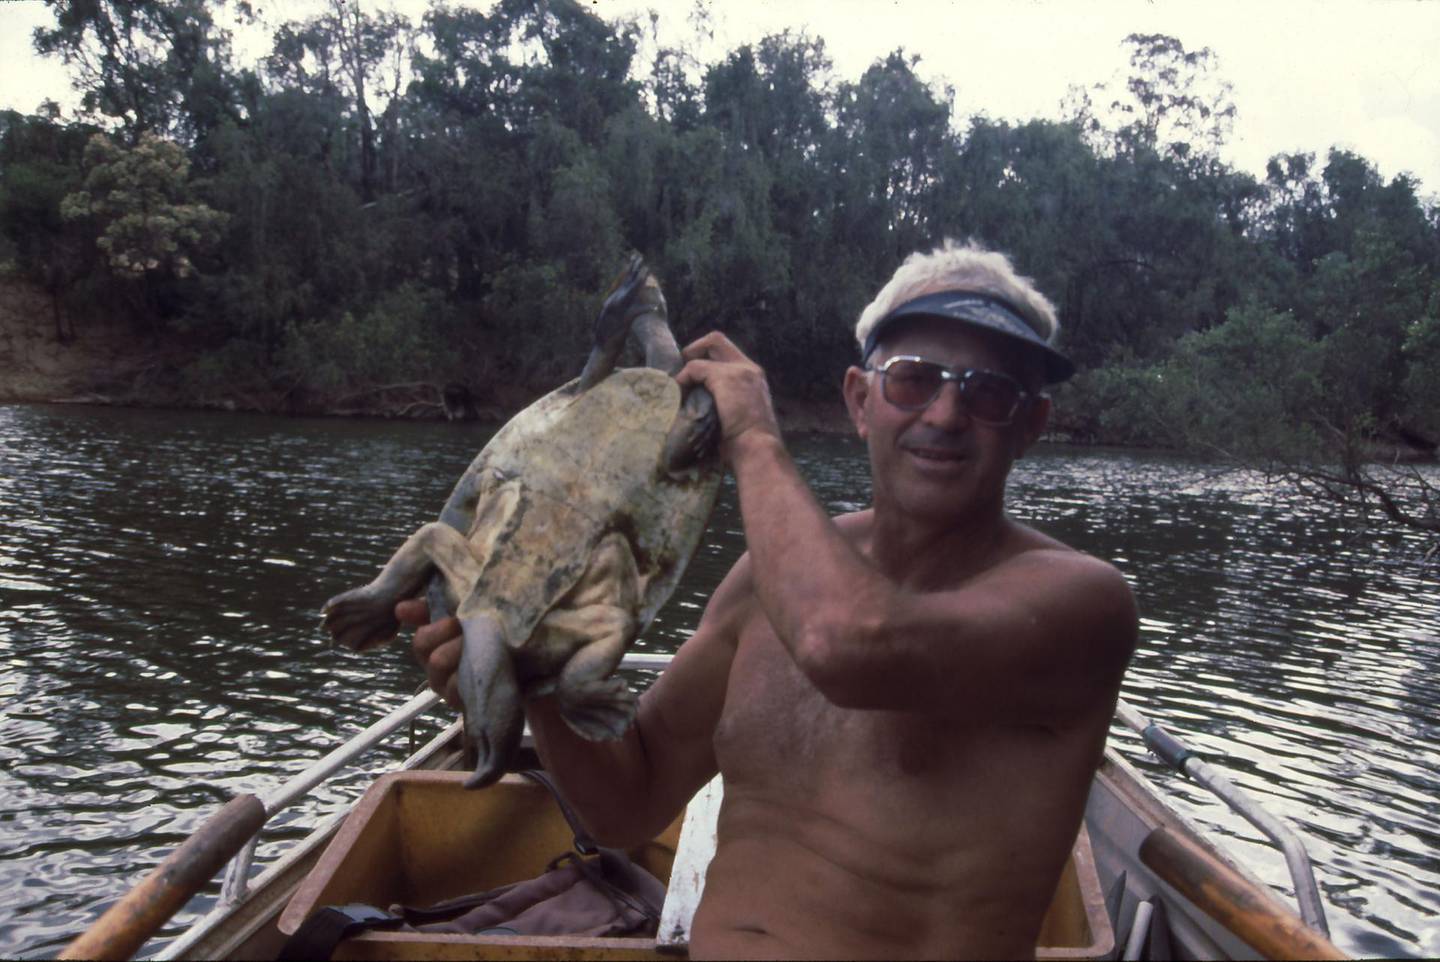 John Cann poses with an adult Mary River turtle. Suplied by John Cann